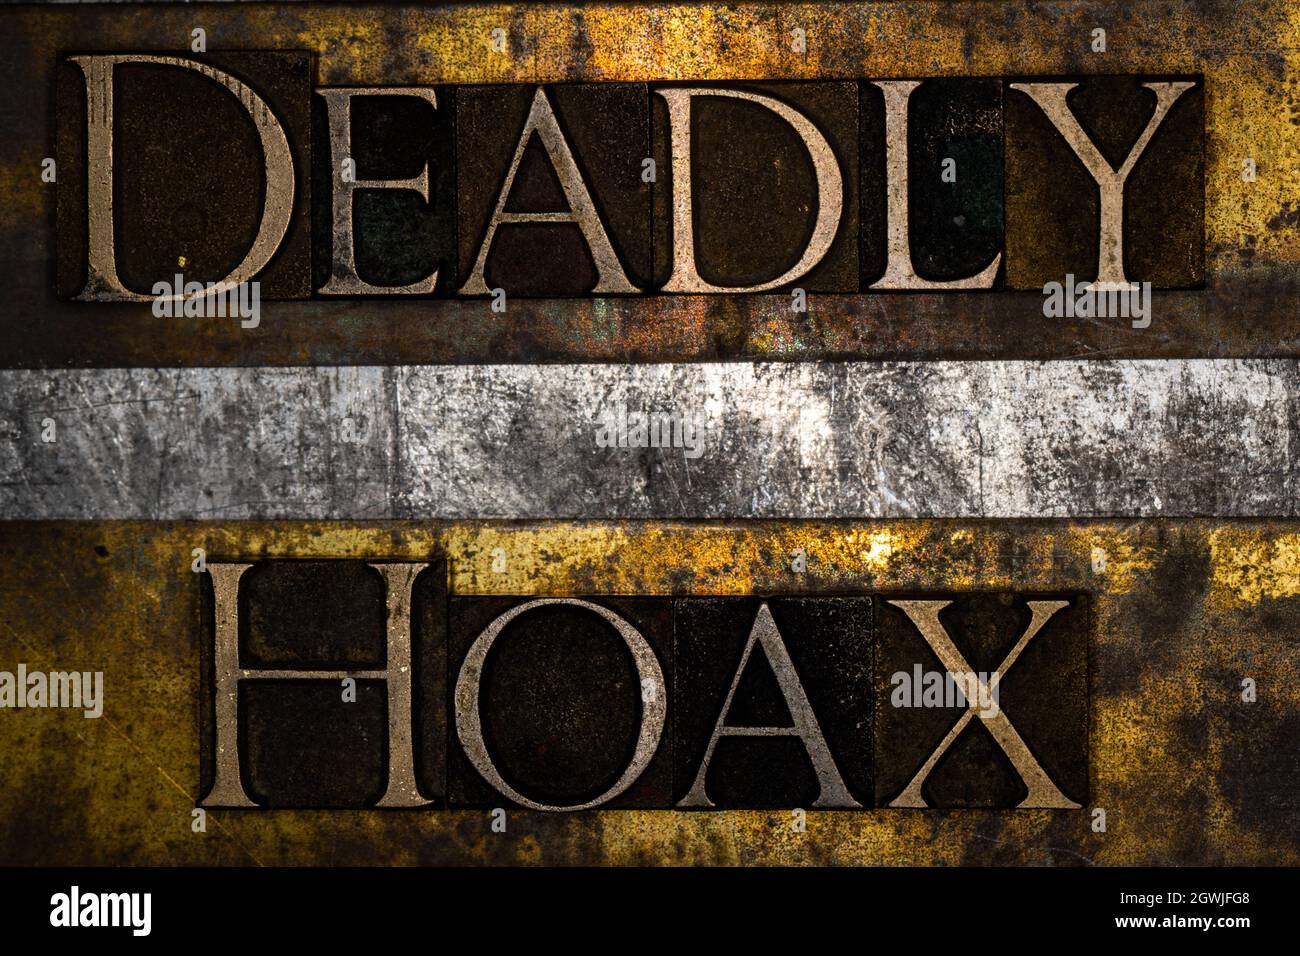 Deadly Hoax text on textured grunge copper and vintage gold background Stock Photo